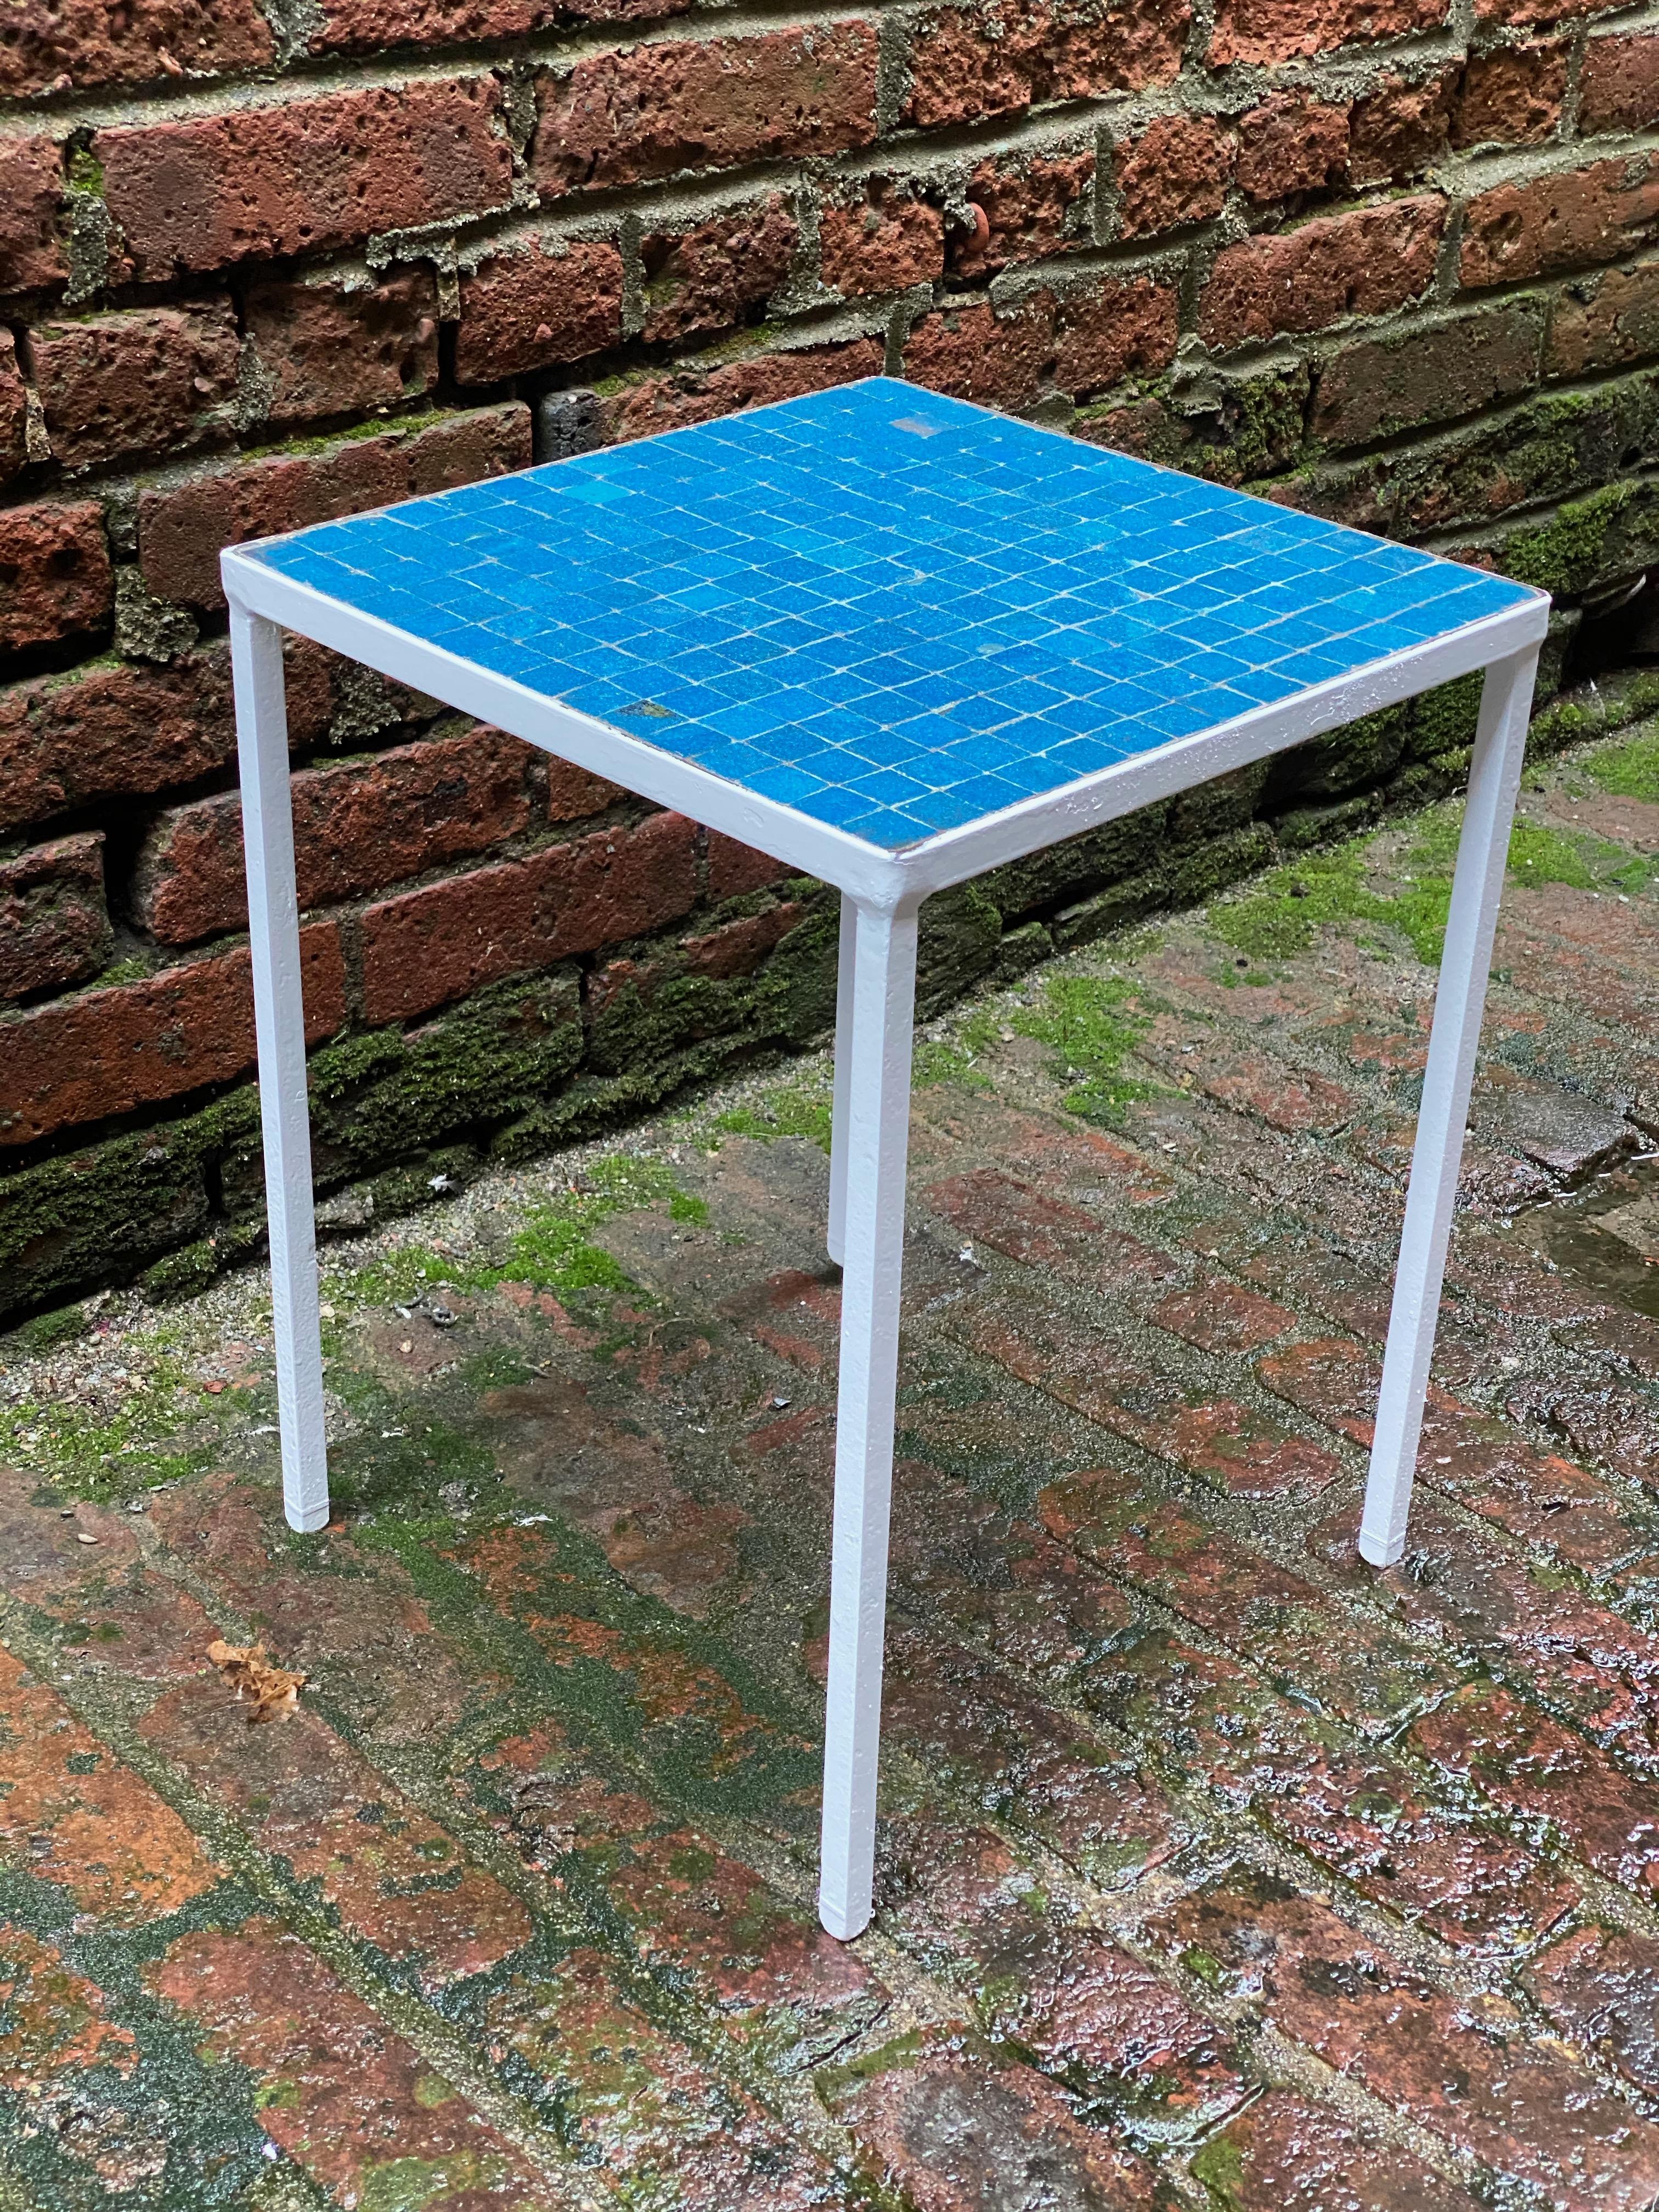 Vibrant blue glass tile table with an iron base. Italian glass tiles, circa 1950-60. Good overall condition with some flawed and chipped tiles.

Measures: 12.63